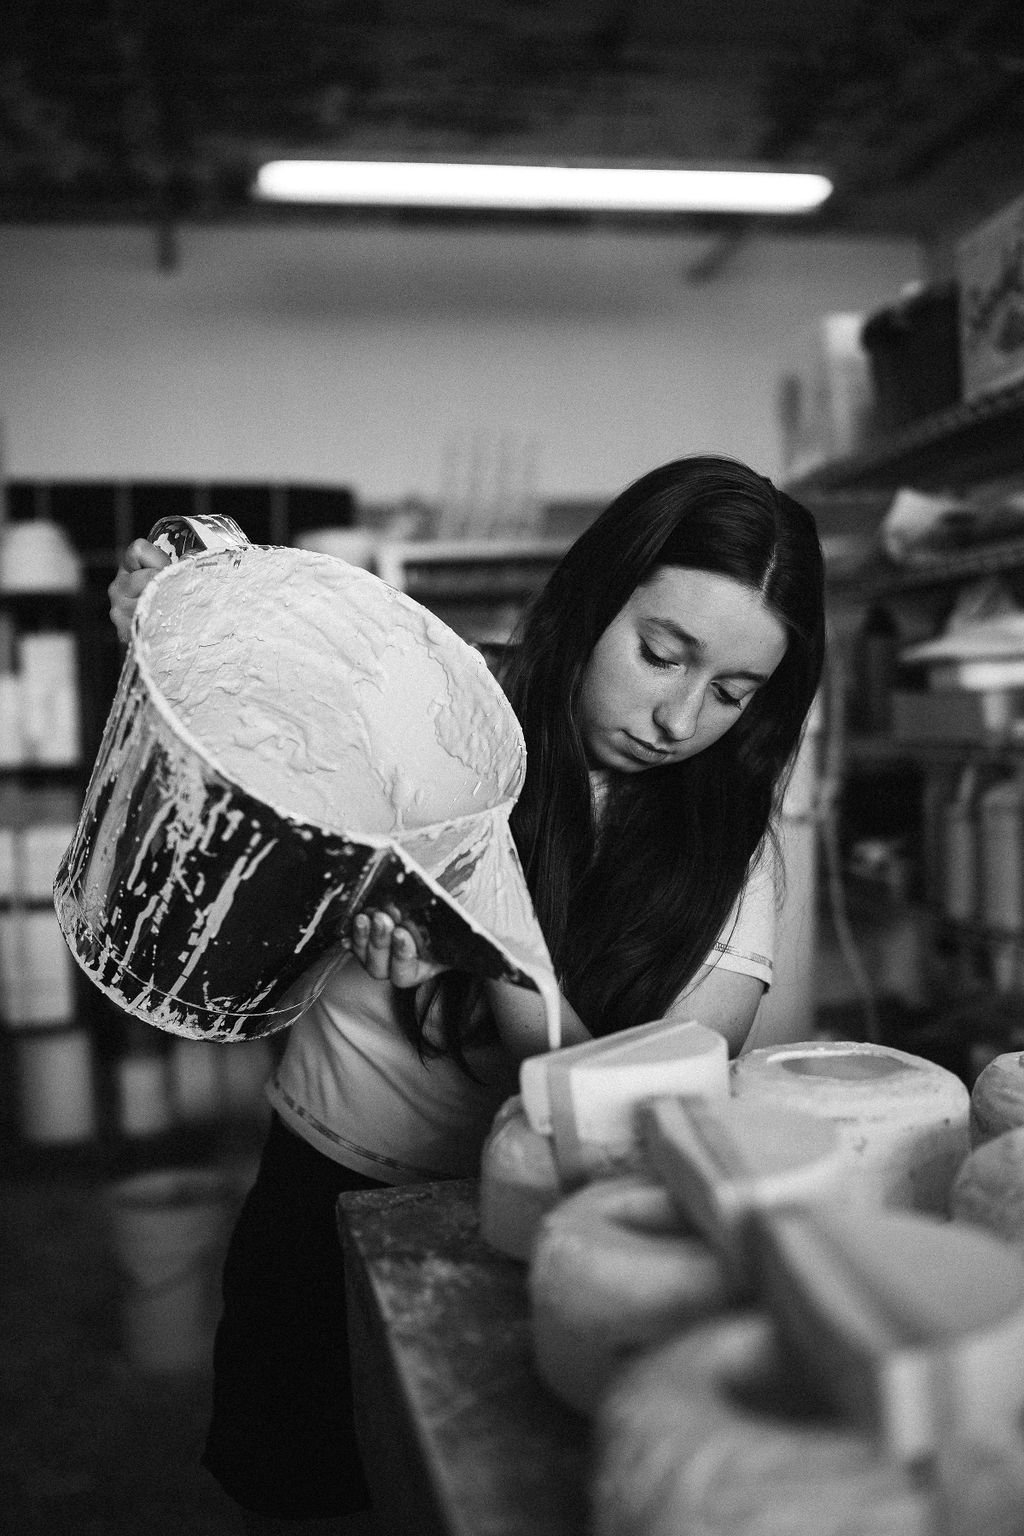  A black and white image of Lauren HB Studio production artist pouring ceramics into molds in the studio 